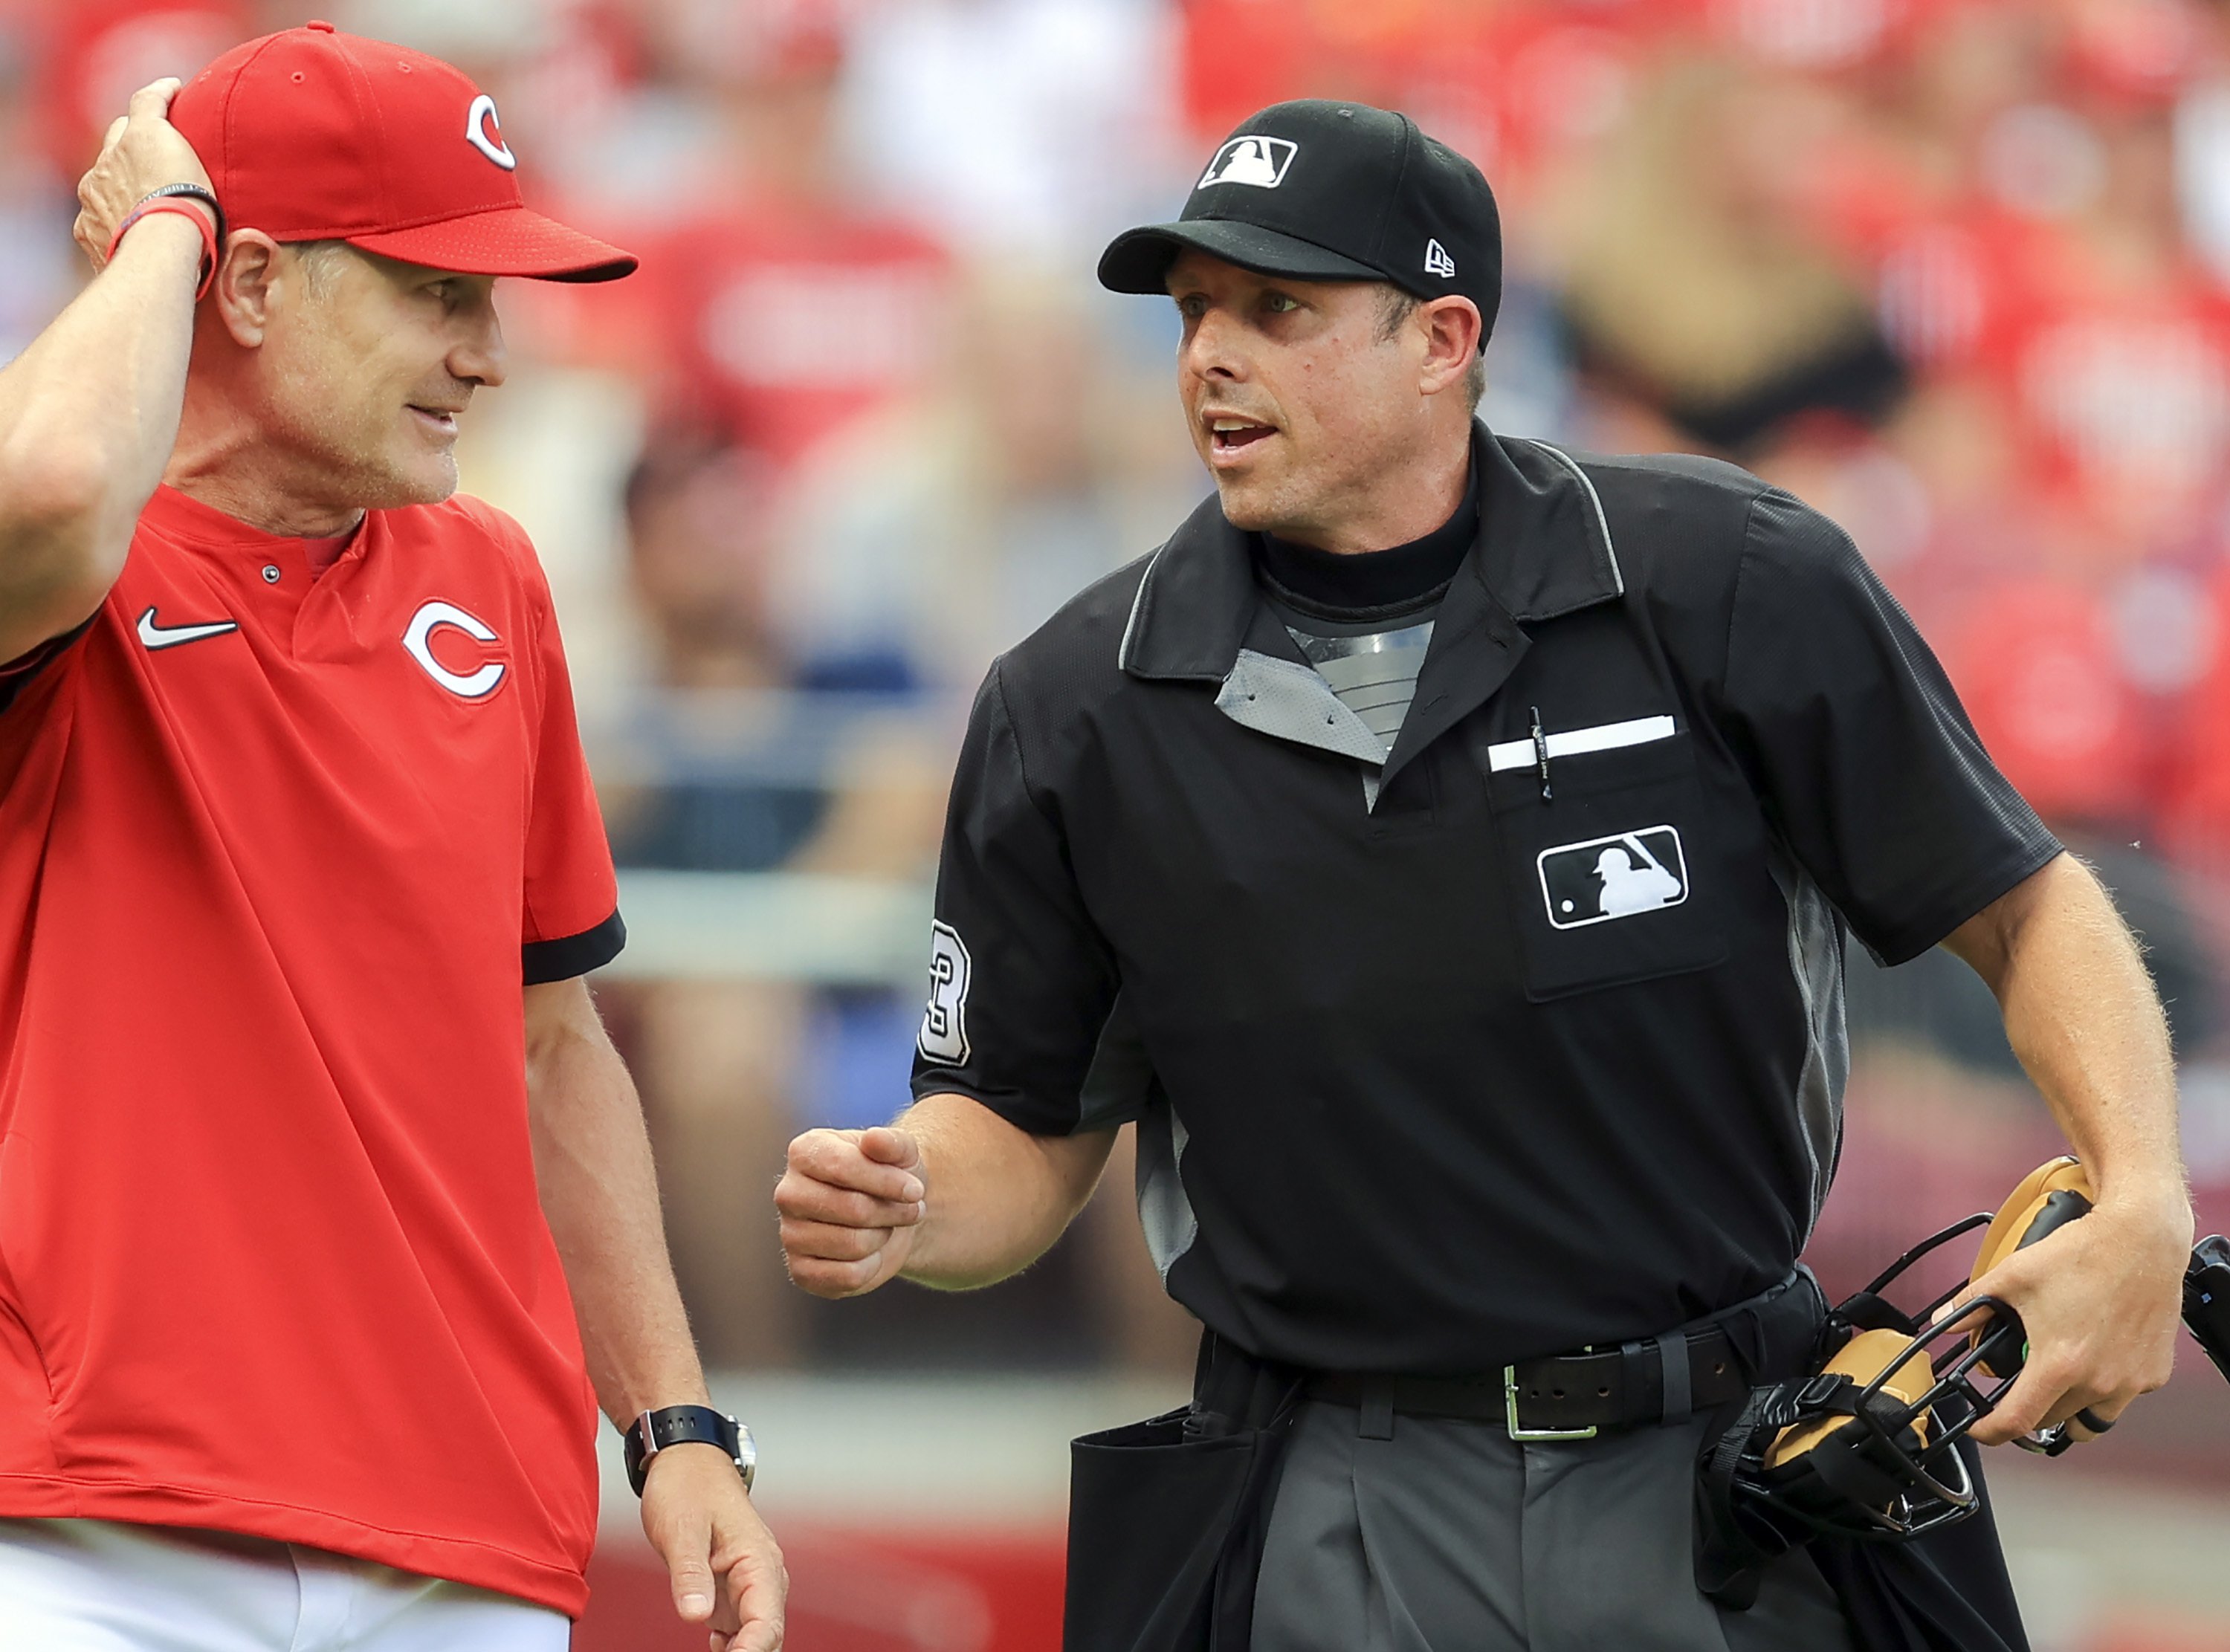 Gone': MLB umpire Tripp Gibson home in tornado-hit Mayfield